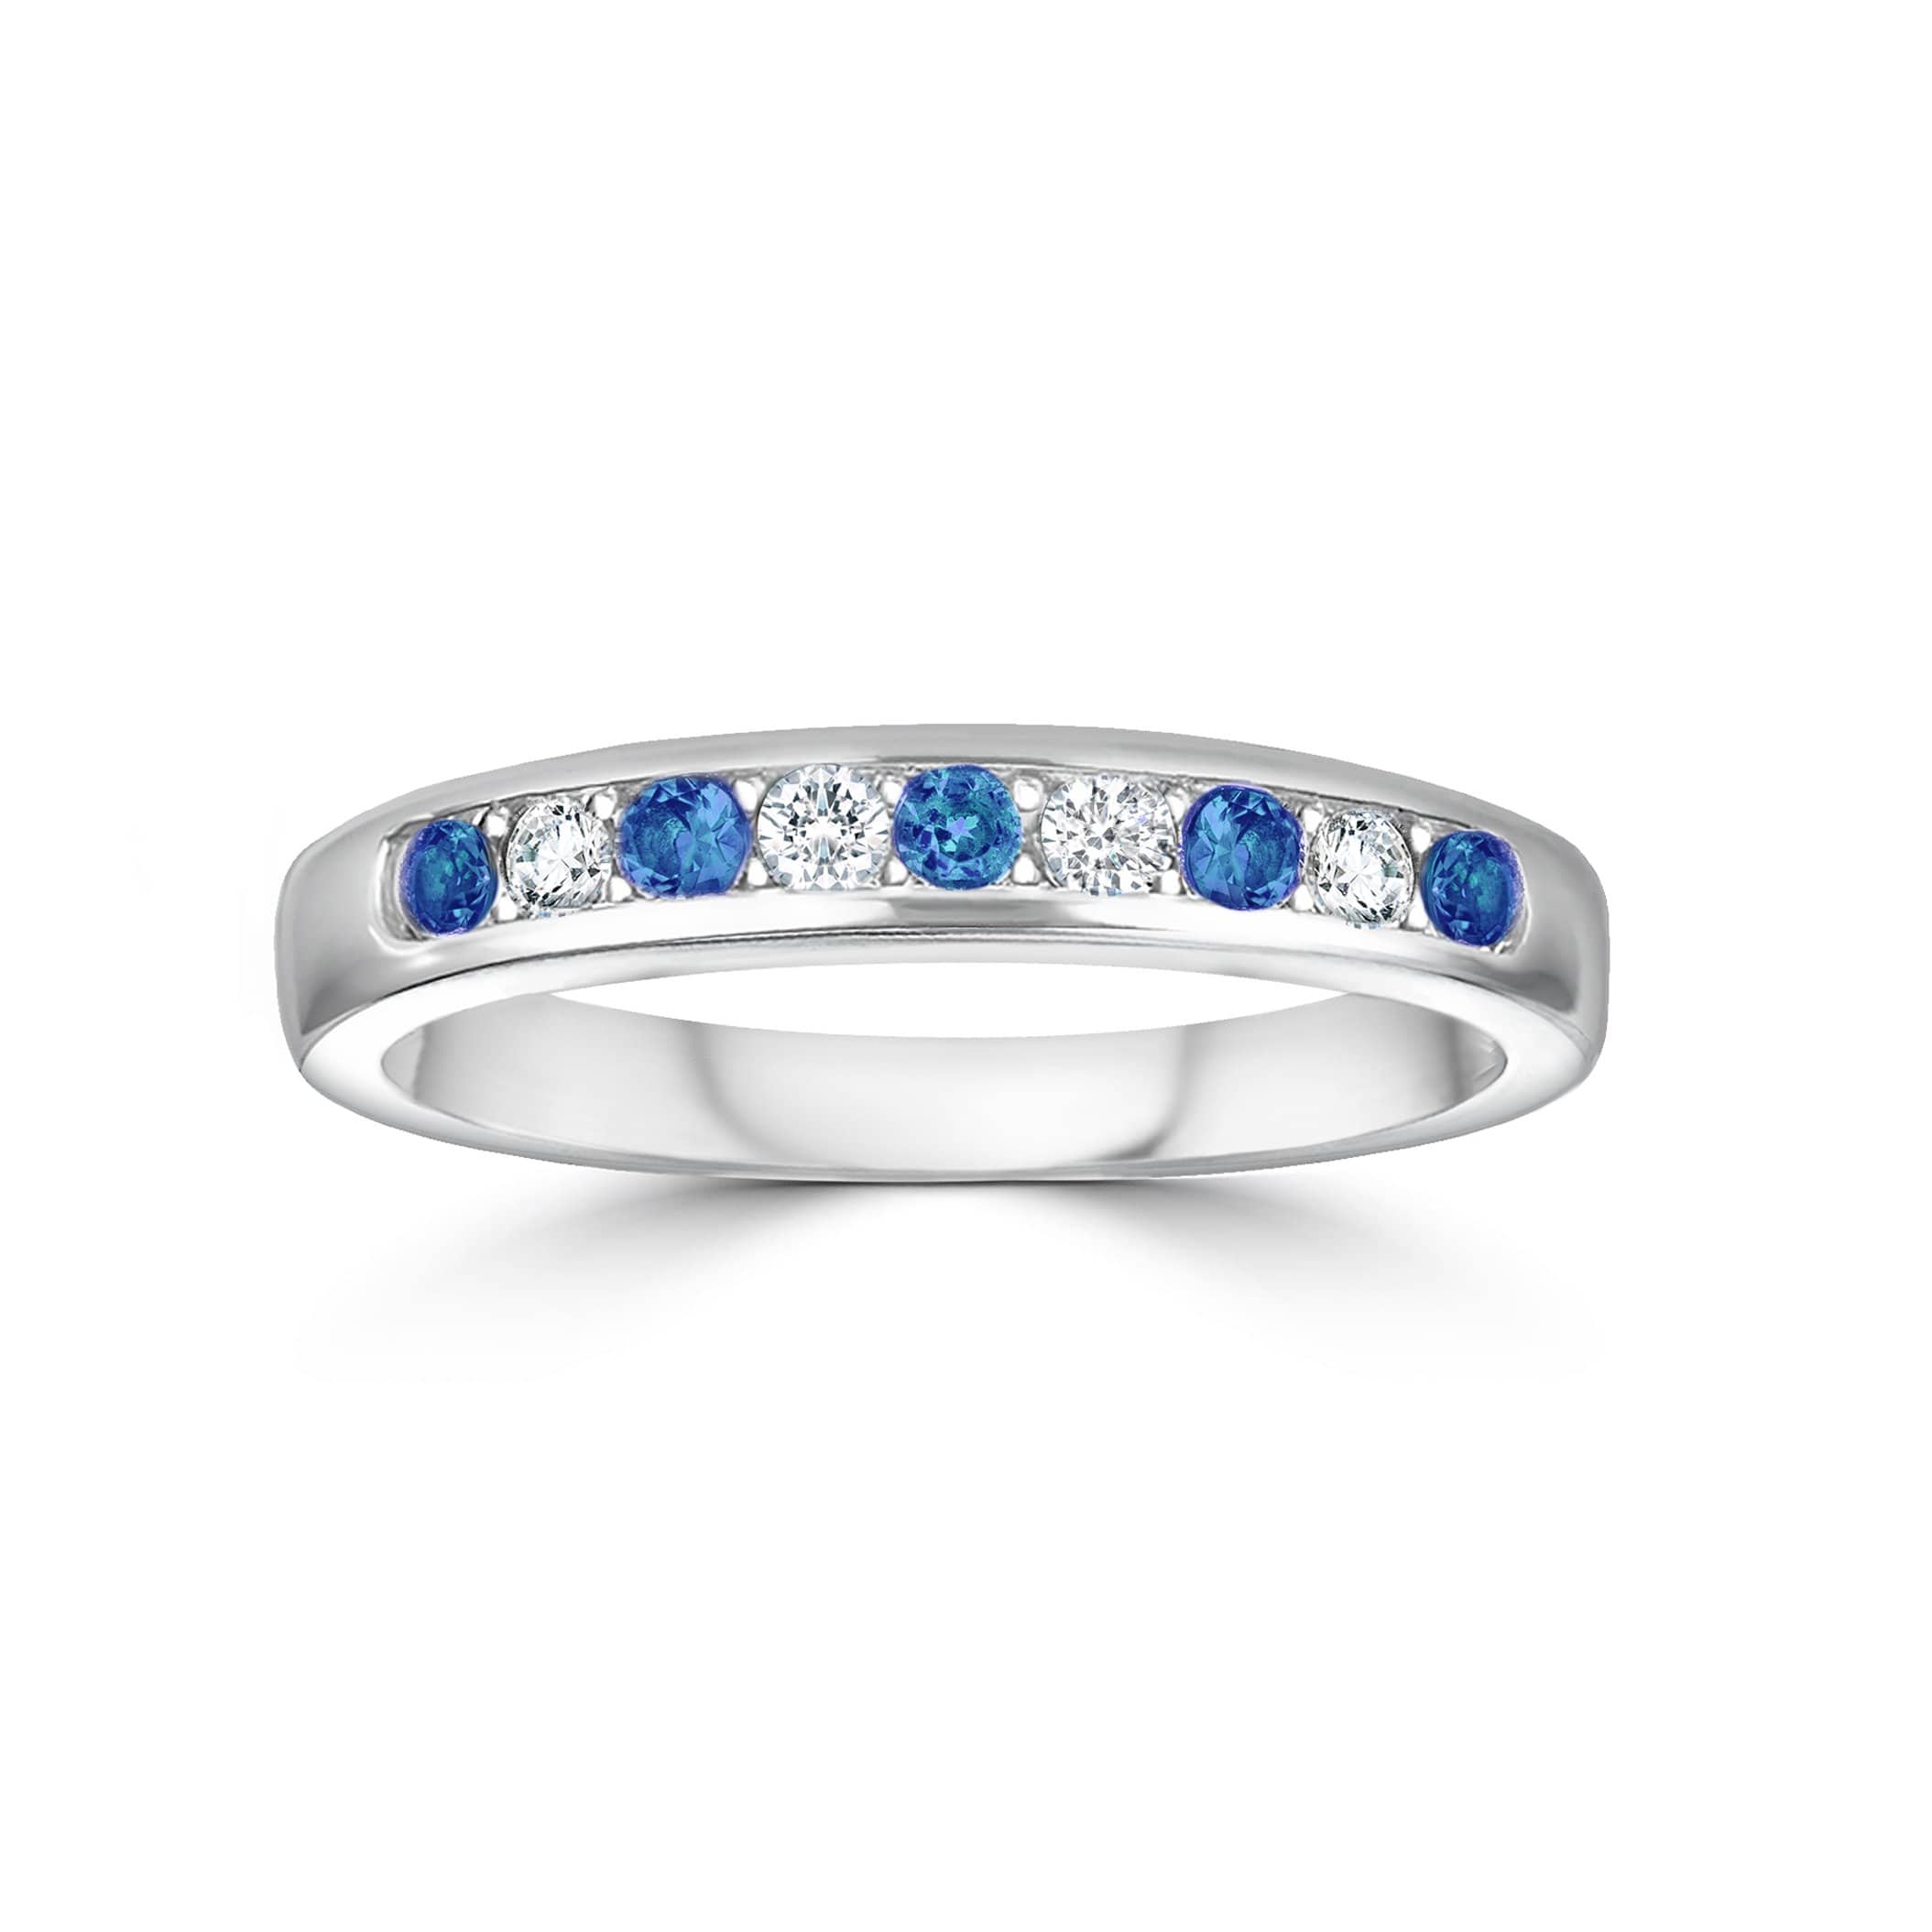 Lynora Jewellery Ring Opulence Channel Set Ring Sterling Silver & Sapphire Stone